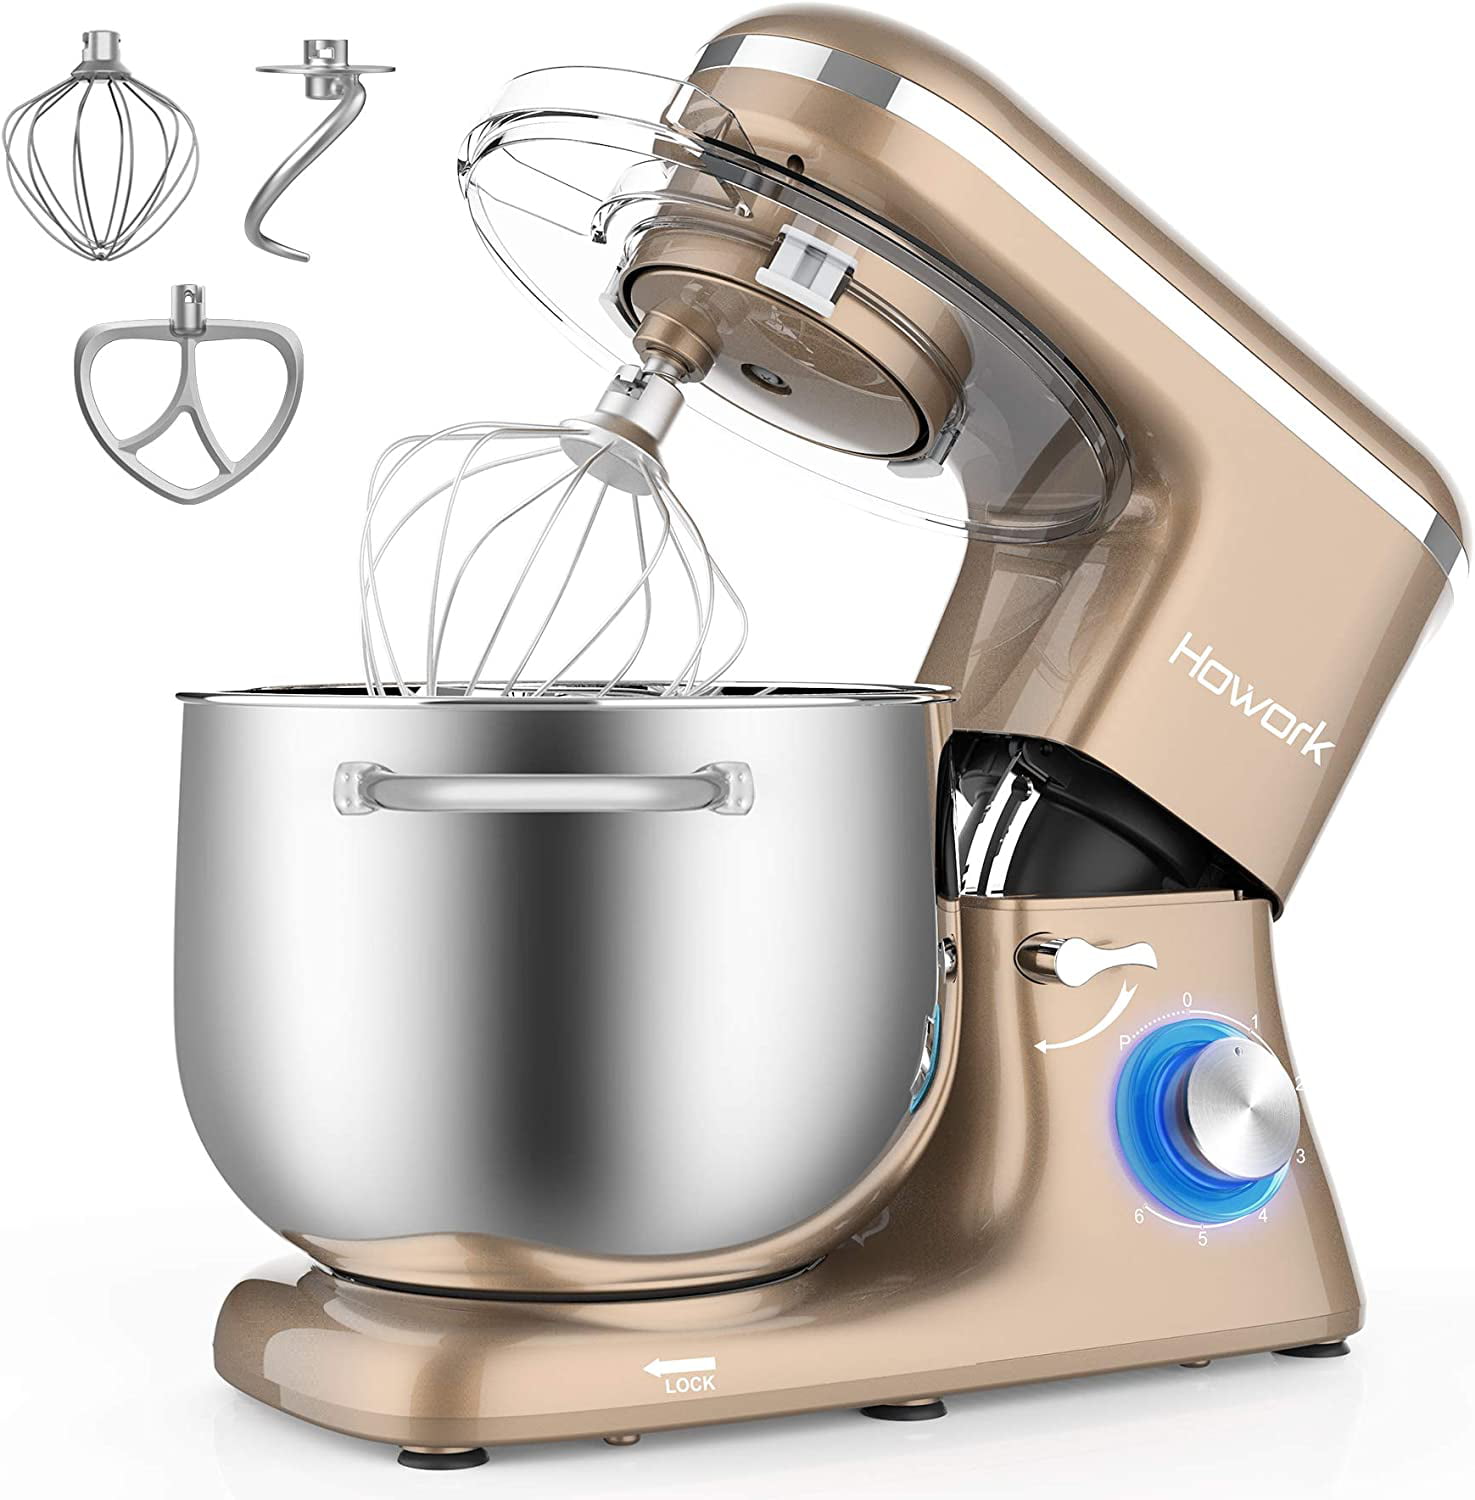 HOWORK Stand Mixer, 8.45 QT Bowl 660W Food Mixer, Multi Functional Kitchen Electric With Hook, Whisk, Beater (8.45 QT, Champagne Gold) - Walmart.com